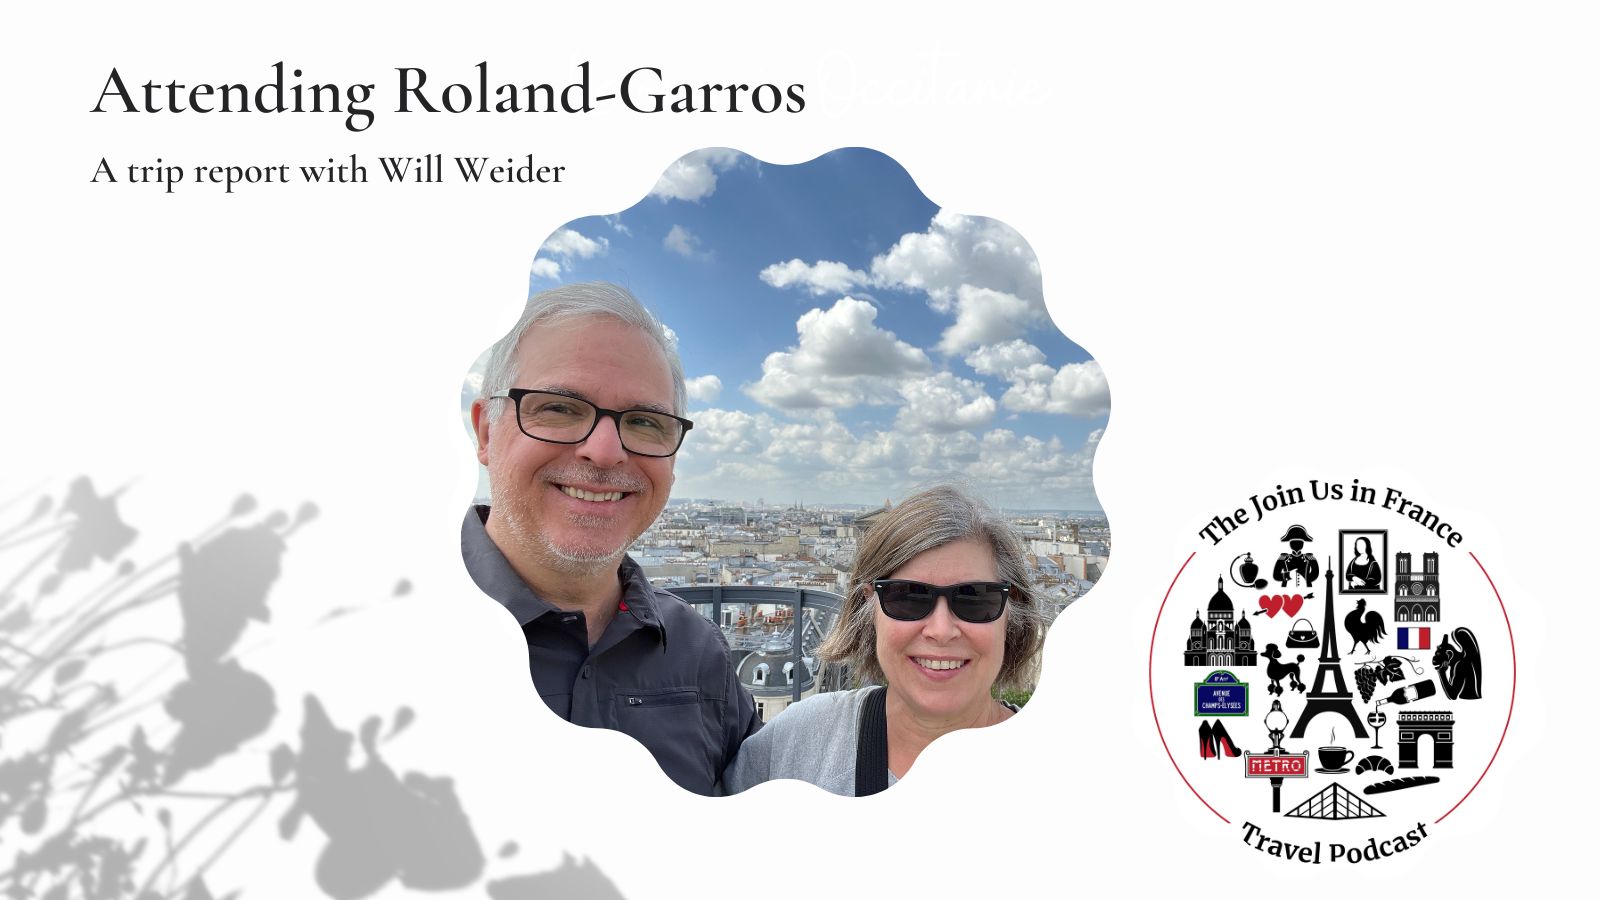 Will Weider and his wife Pam: attending roland-garros episode